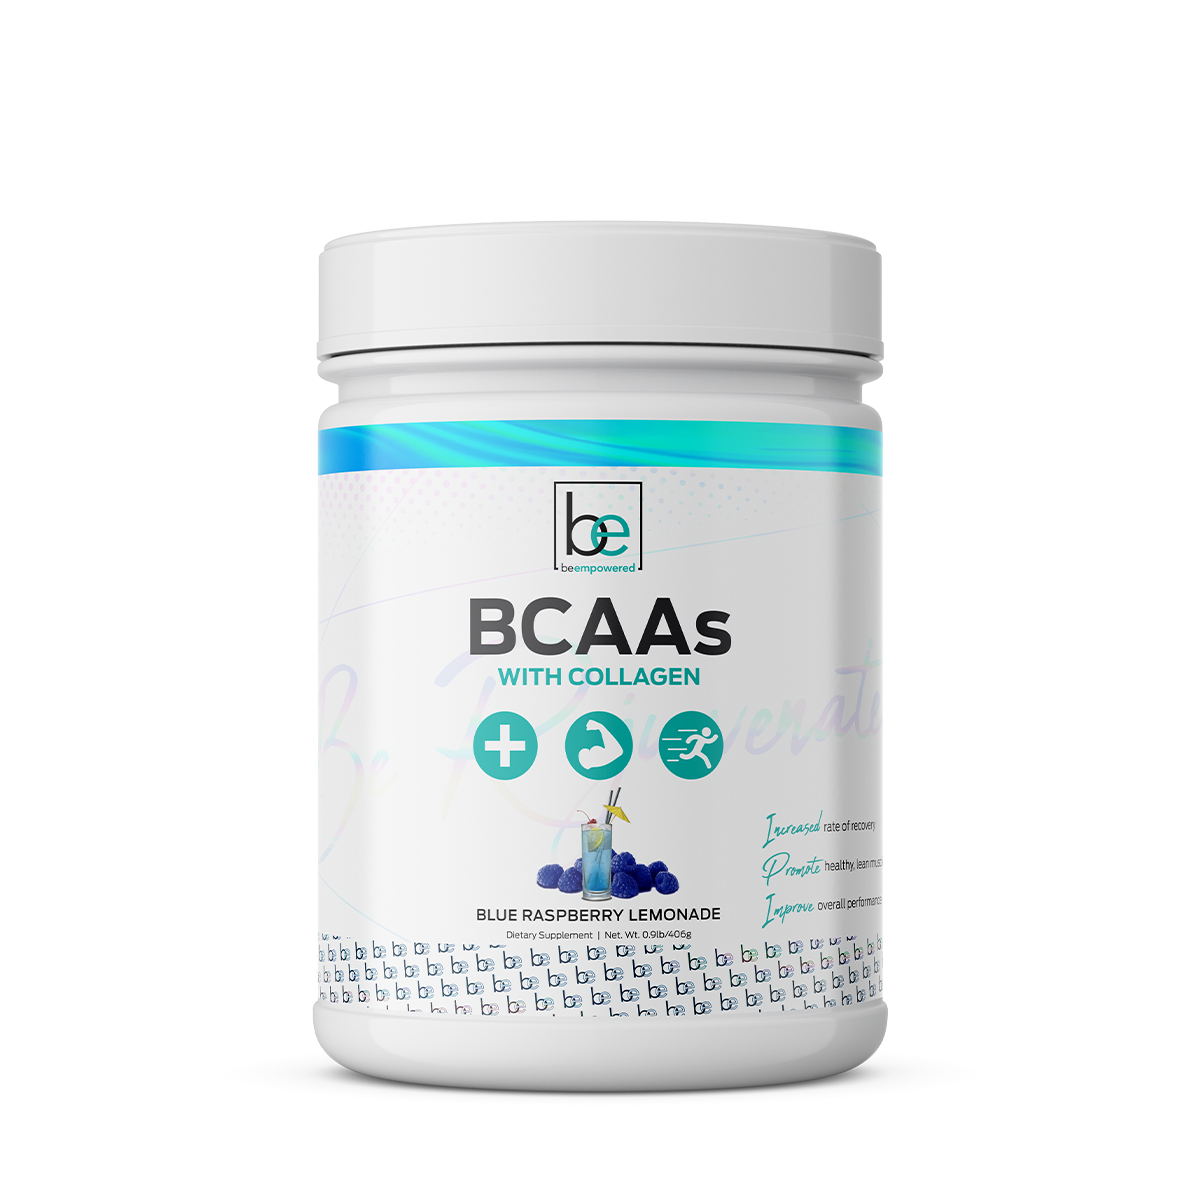 Image of BCAA w/Collagen from LIV Body.